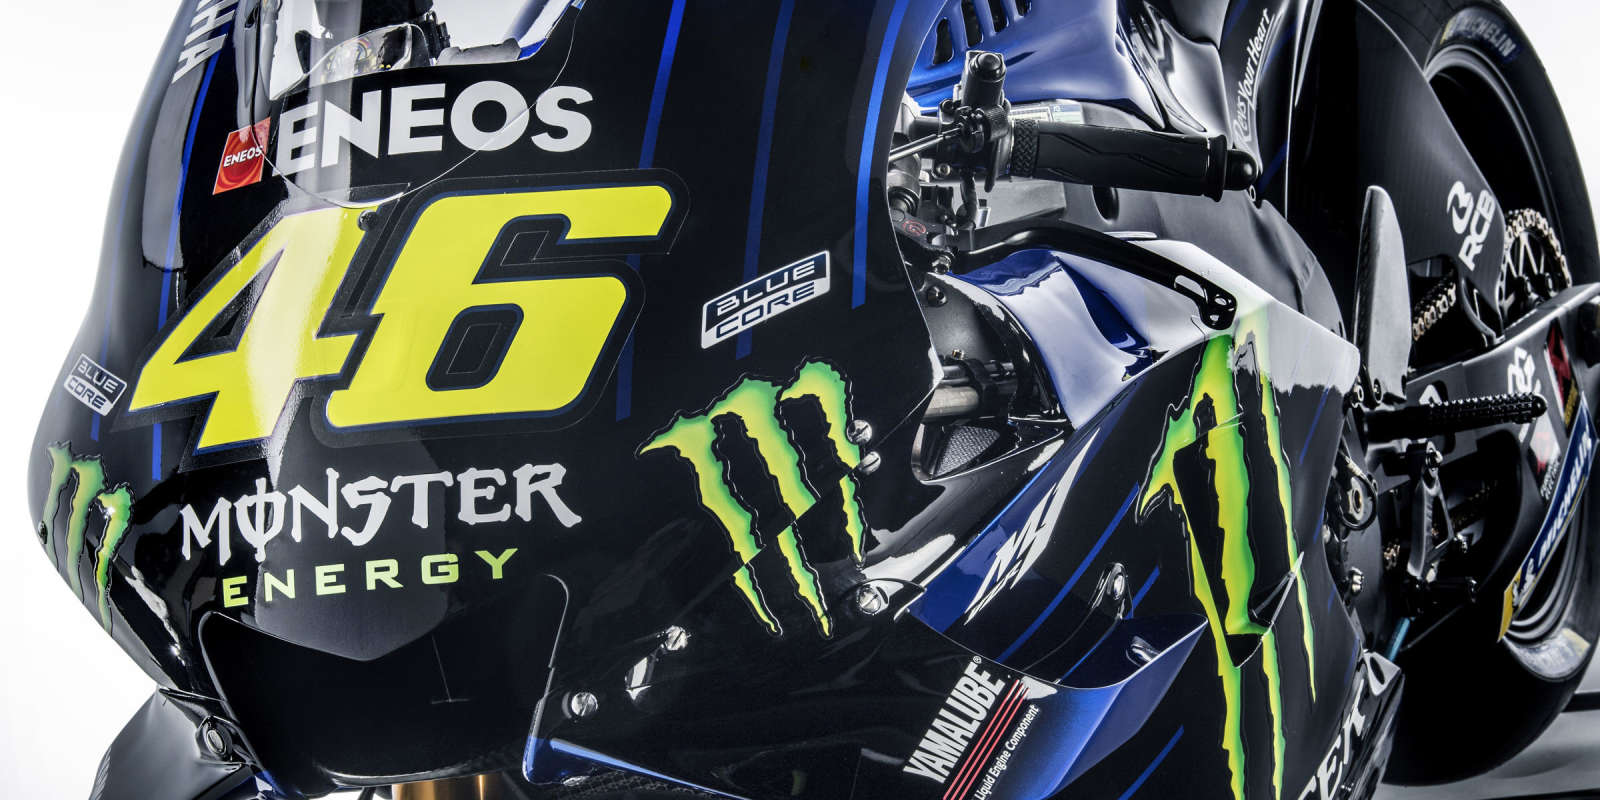 10 things you might not have known about Monster Energy & Yamaha